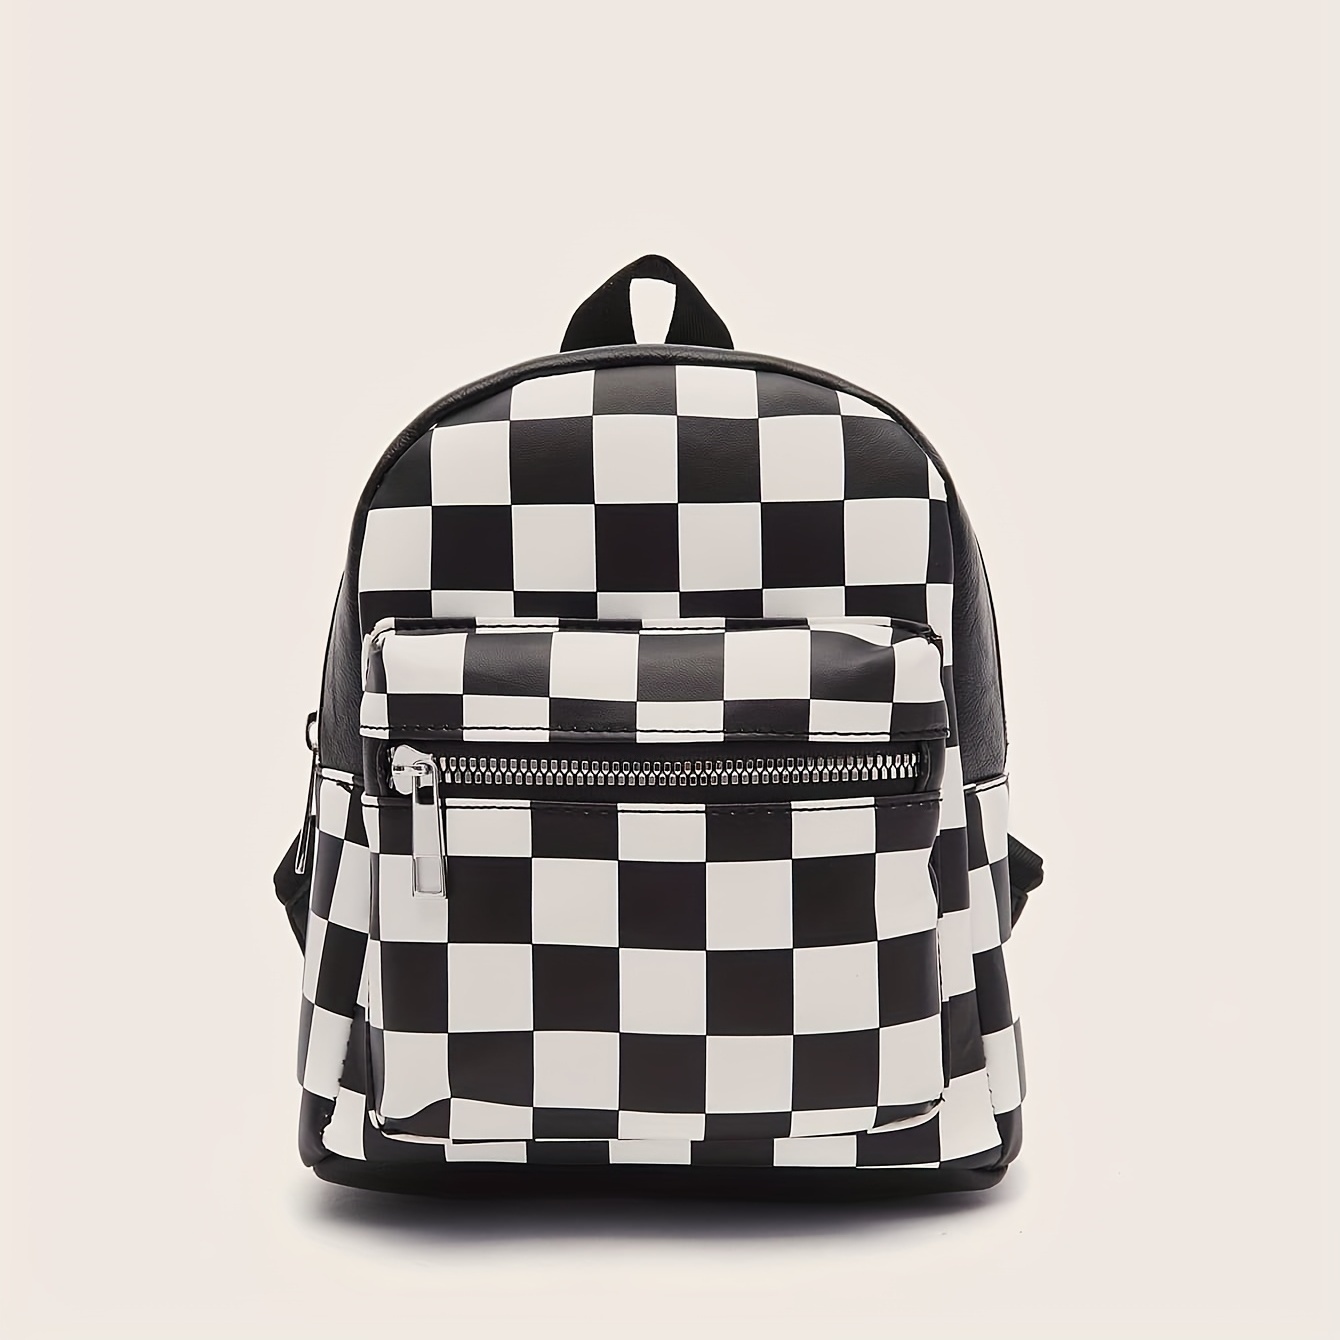 

Checkered Backpack For Women, Mini Faux Leather Daypack, Plaid Pattern Travel School Bag